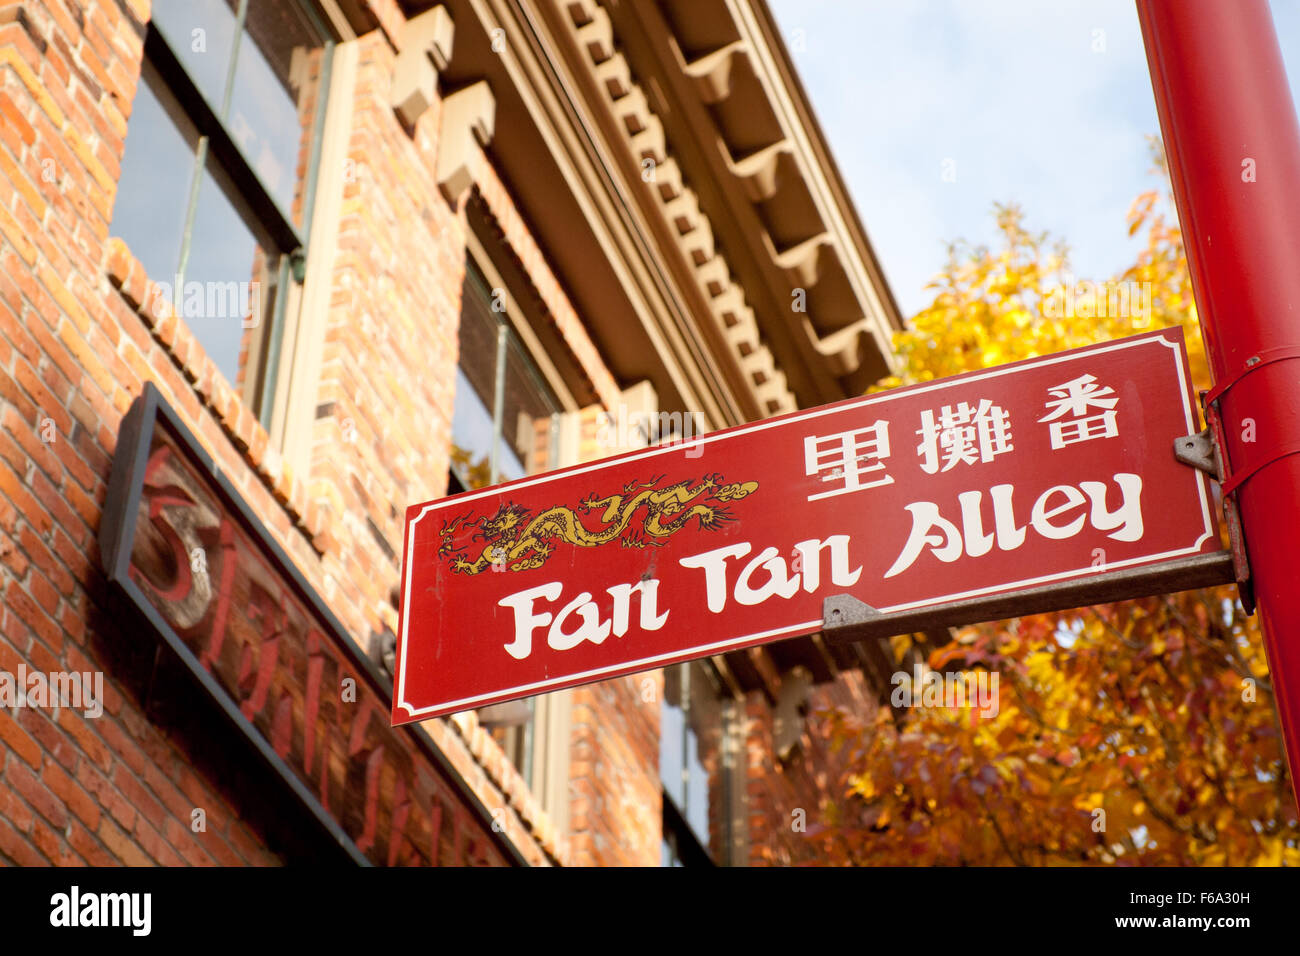 A street sign for Fan Tan Alley in Chinatown, Victoria, British Columbia, Canada. Stock Photo